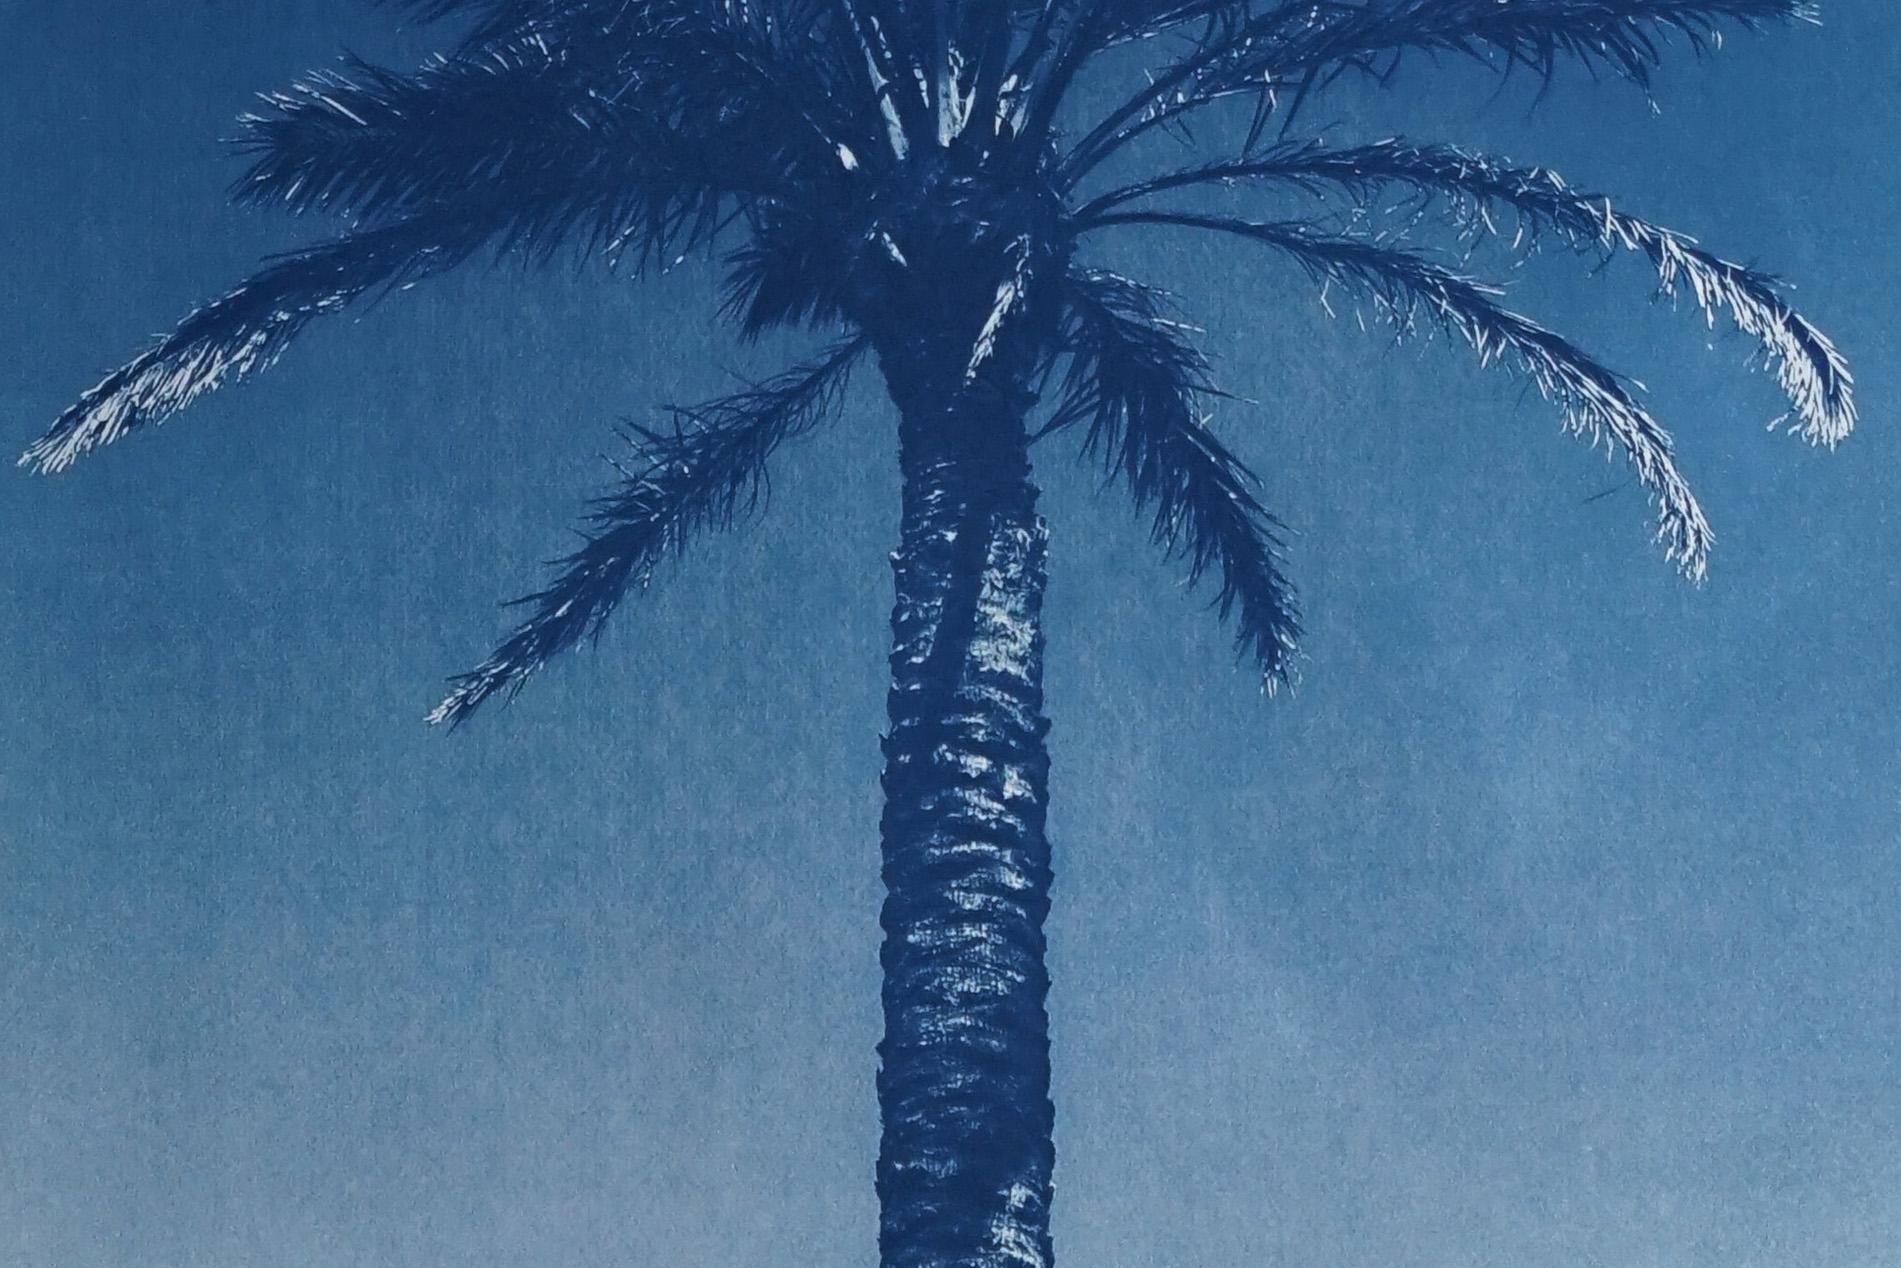 Exclusive limited edition cyanotype diptych.
Details:
+ Title: Duo of Egyptian Palms
+ Year: 2021
+ Edition Size: 20
+ Stamped and Certificate of Authenticity provided
+ Measurements : 100x140 cm (40 x 55 in.) Each paper measures 70x100 cm (28x 40